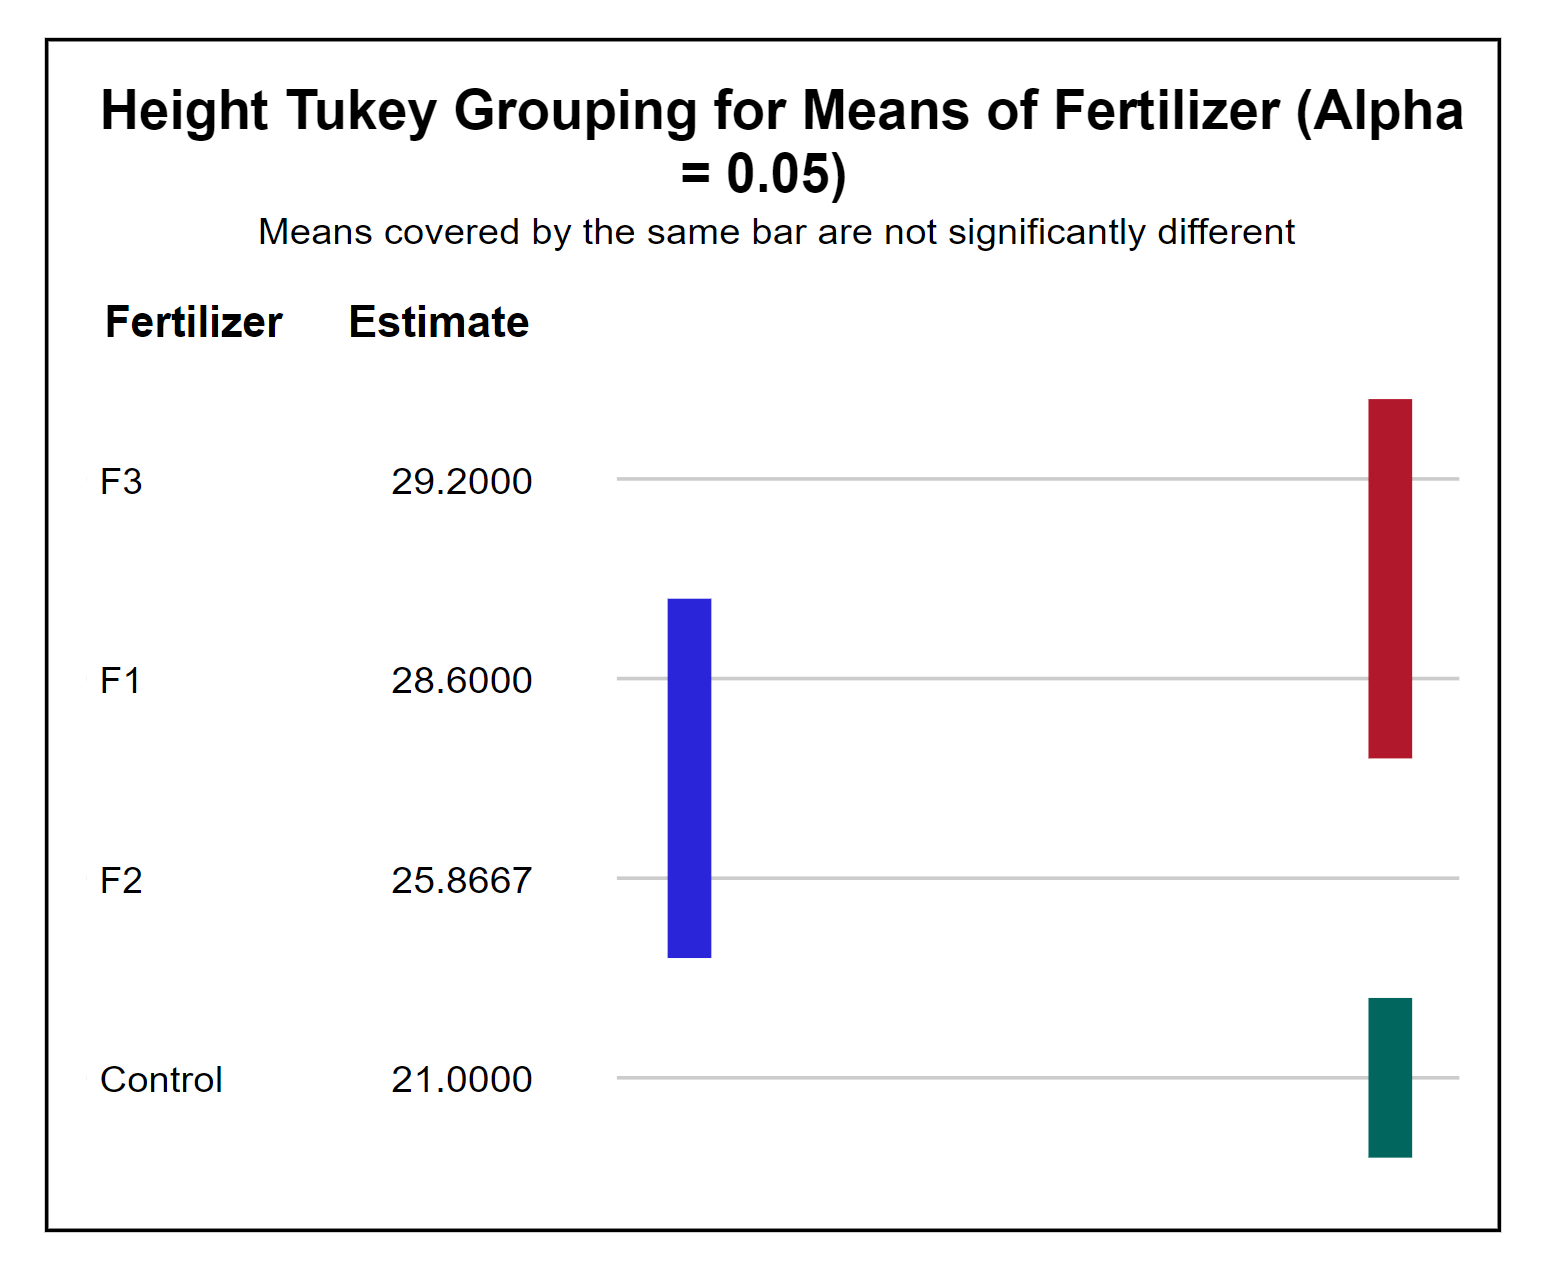 Height Tukey grouping for fertilizer treatment means. F3 and F1 are covered by a single blue bar, F1 and F2 are covered by a single red bar, and Control is covered by a green bar.